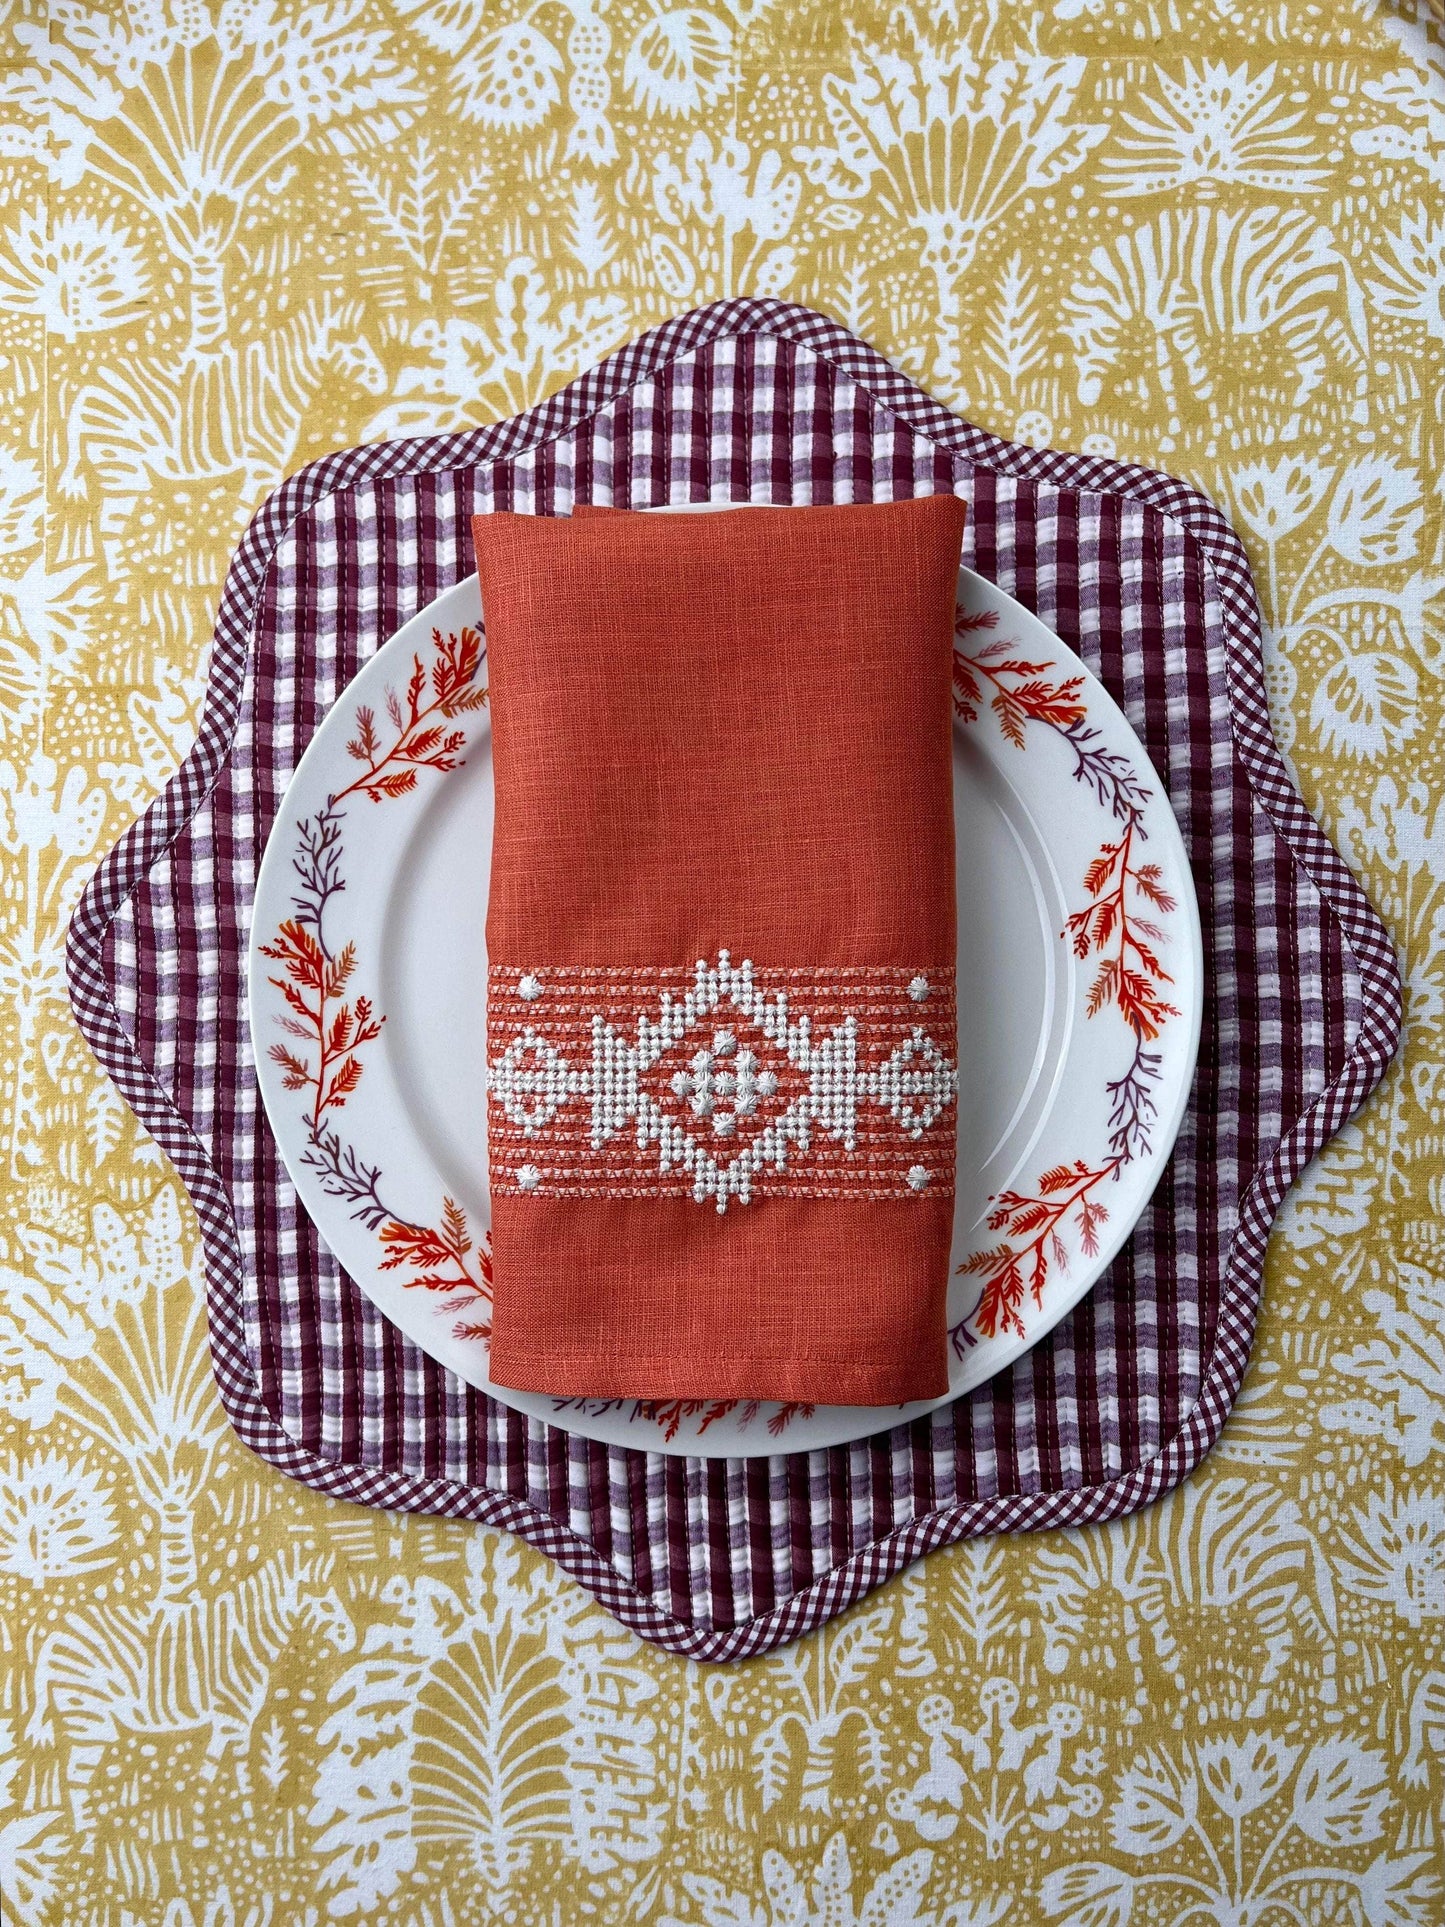 The Gingham Scallop Placemat - Burgundy And Navy